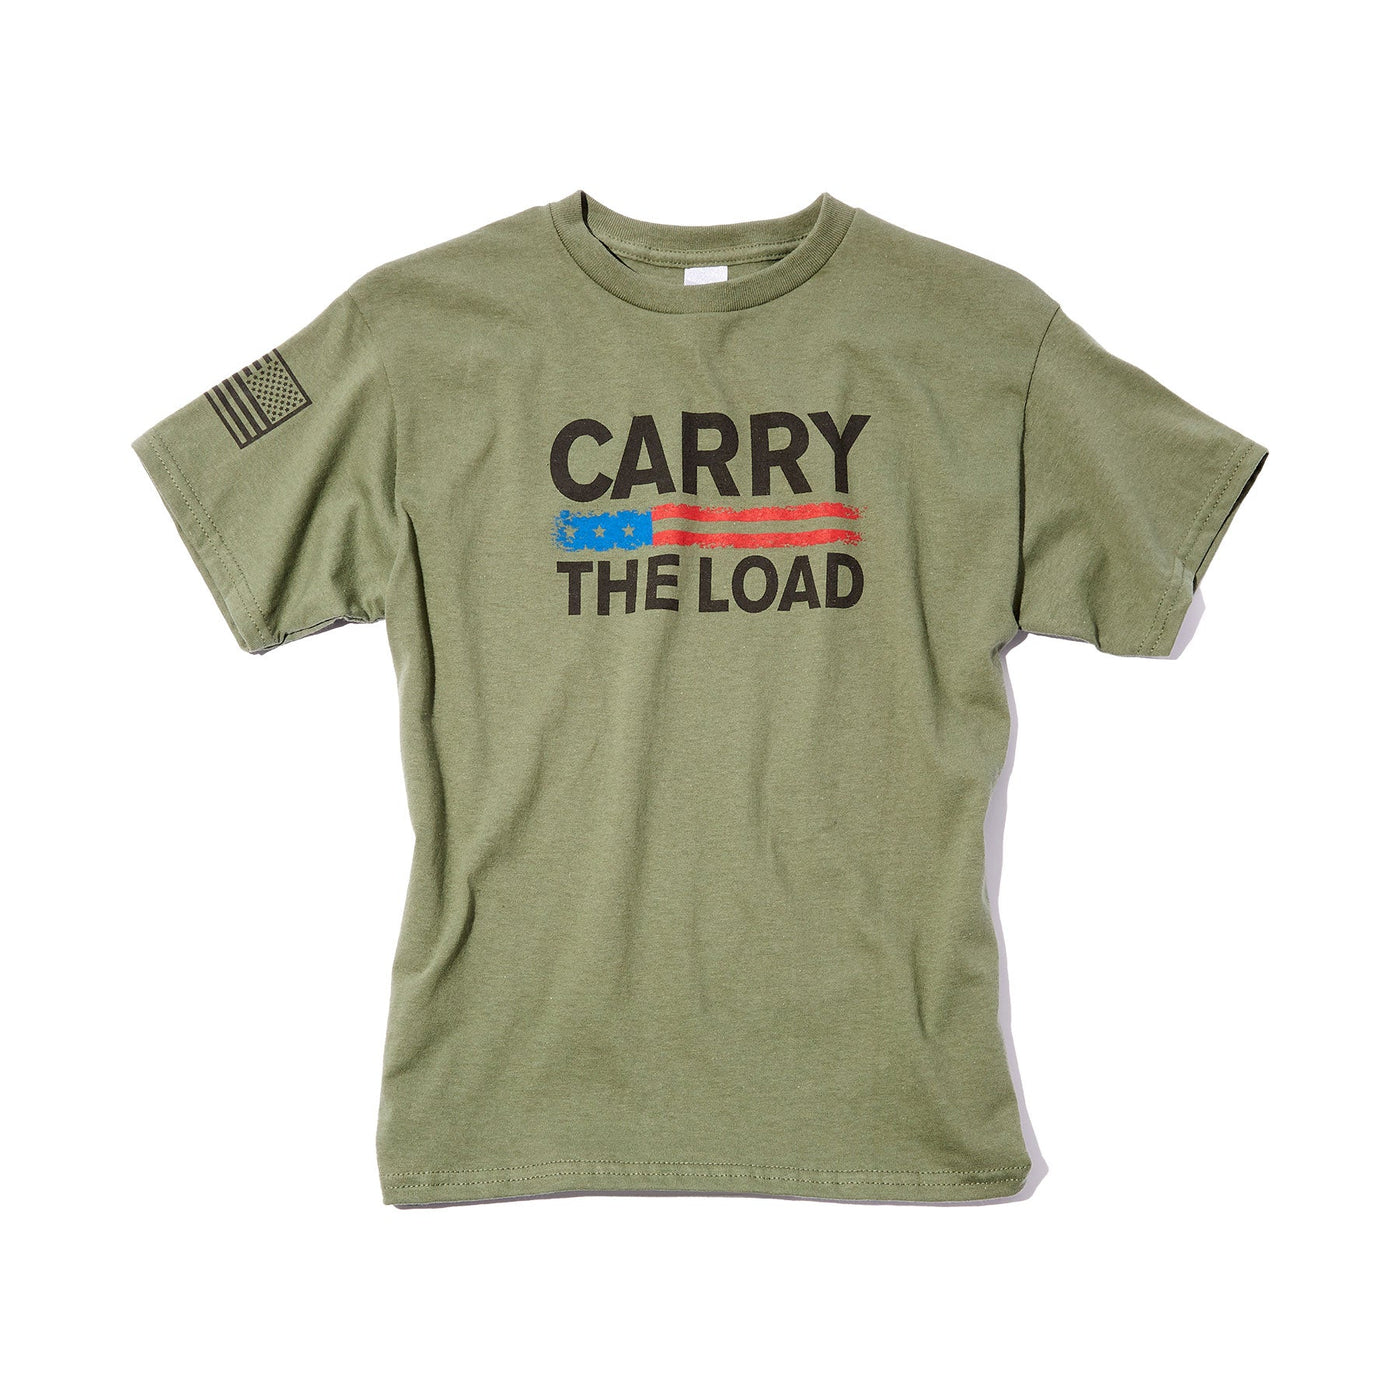 Military Green CTL T-Shirt - Carry The Load Shop